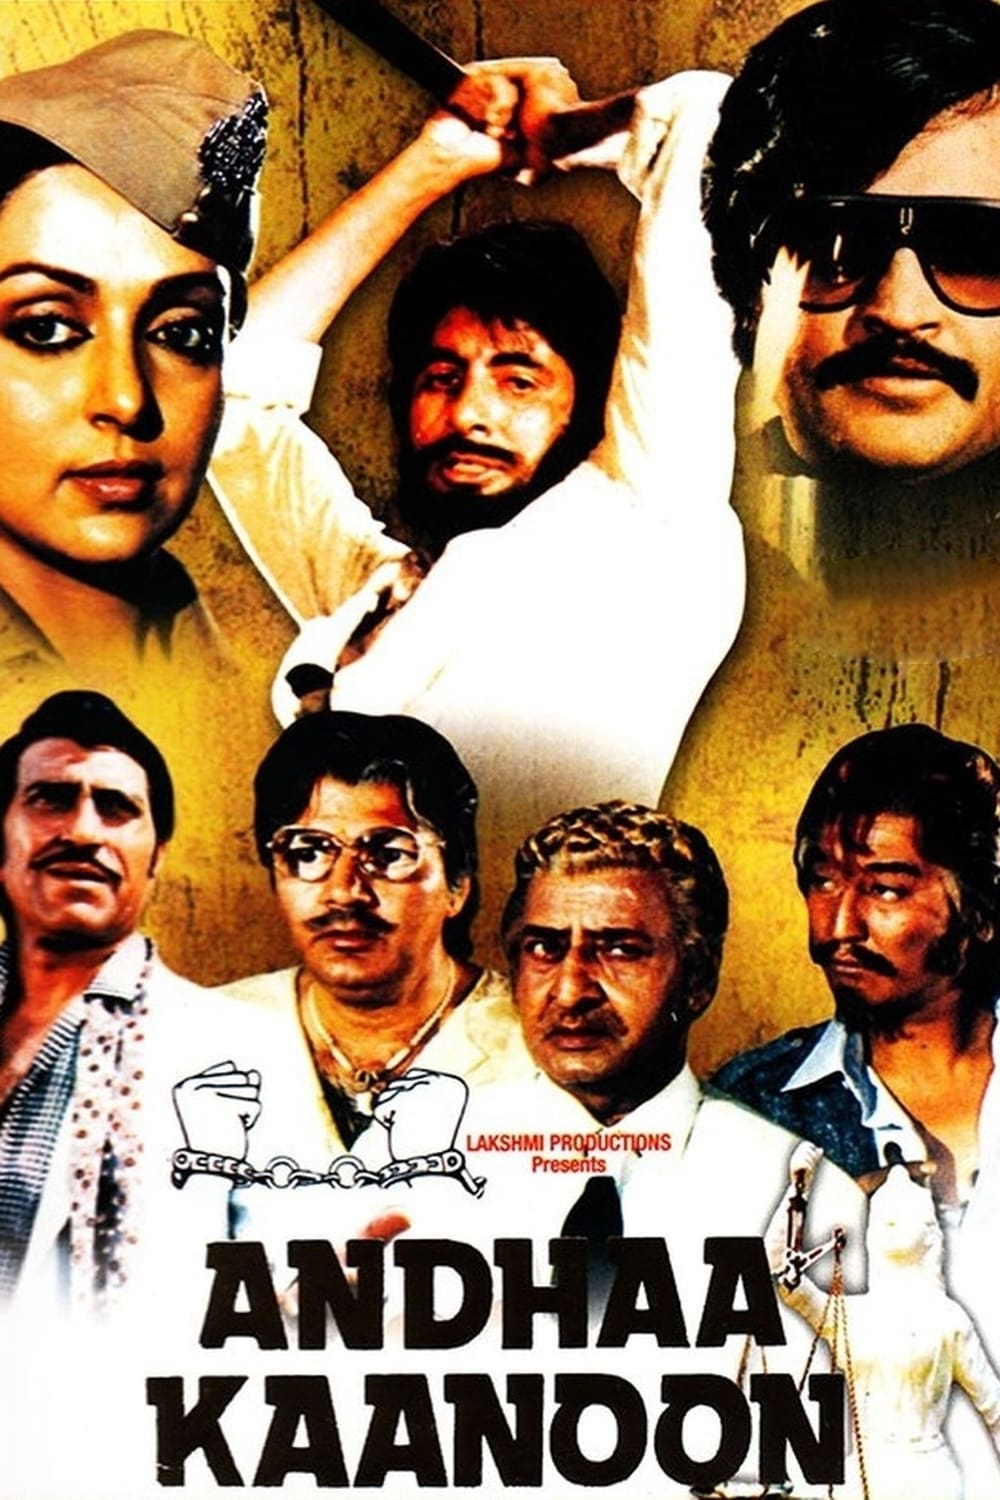 Poster for the movie "Andhaa Kaanoon"